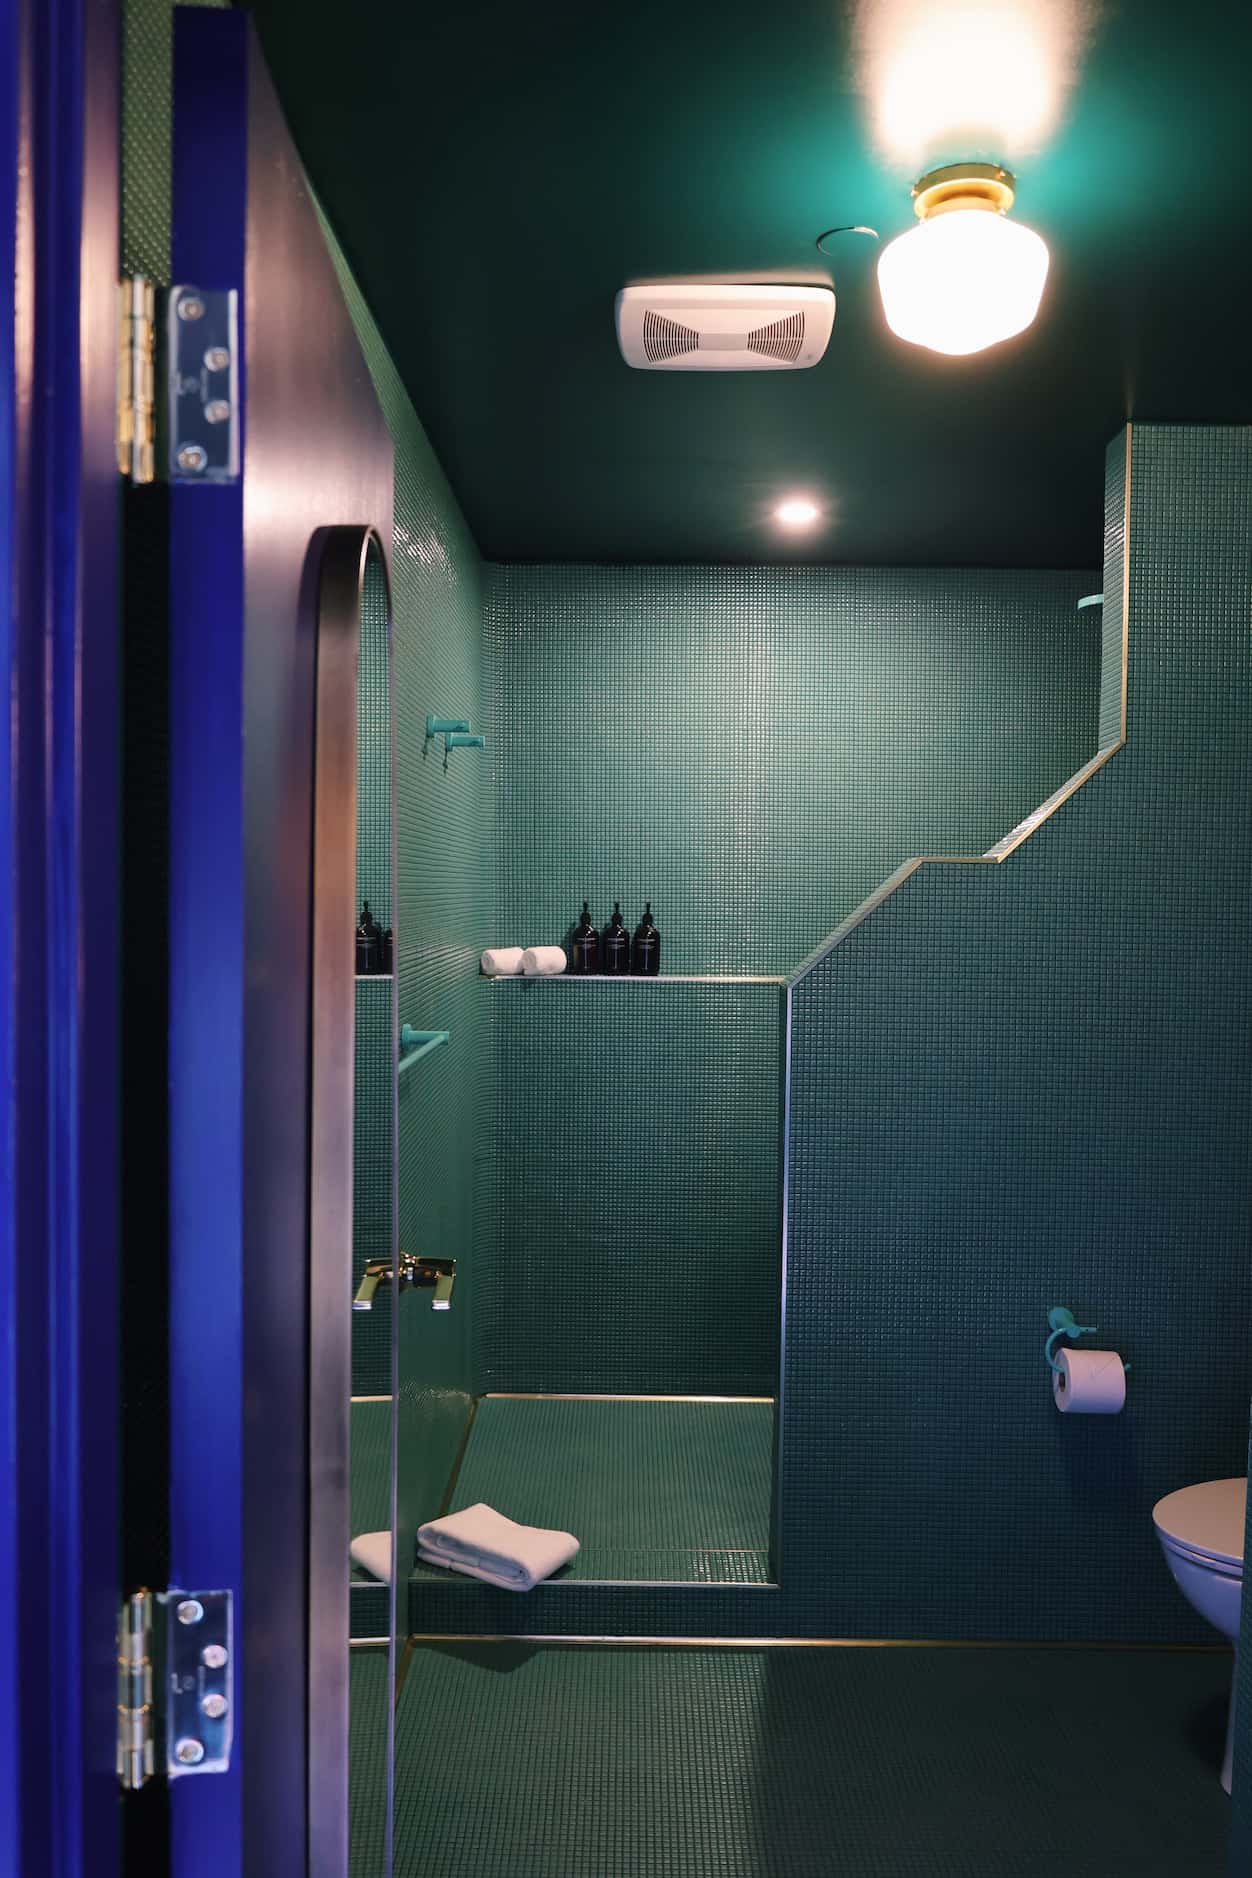 The bathrooms at Hotel Herringbone are monochromatic, designed floor to ceiling with tiny...